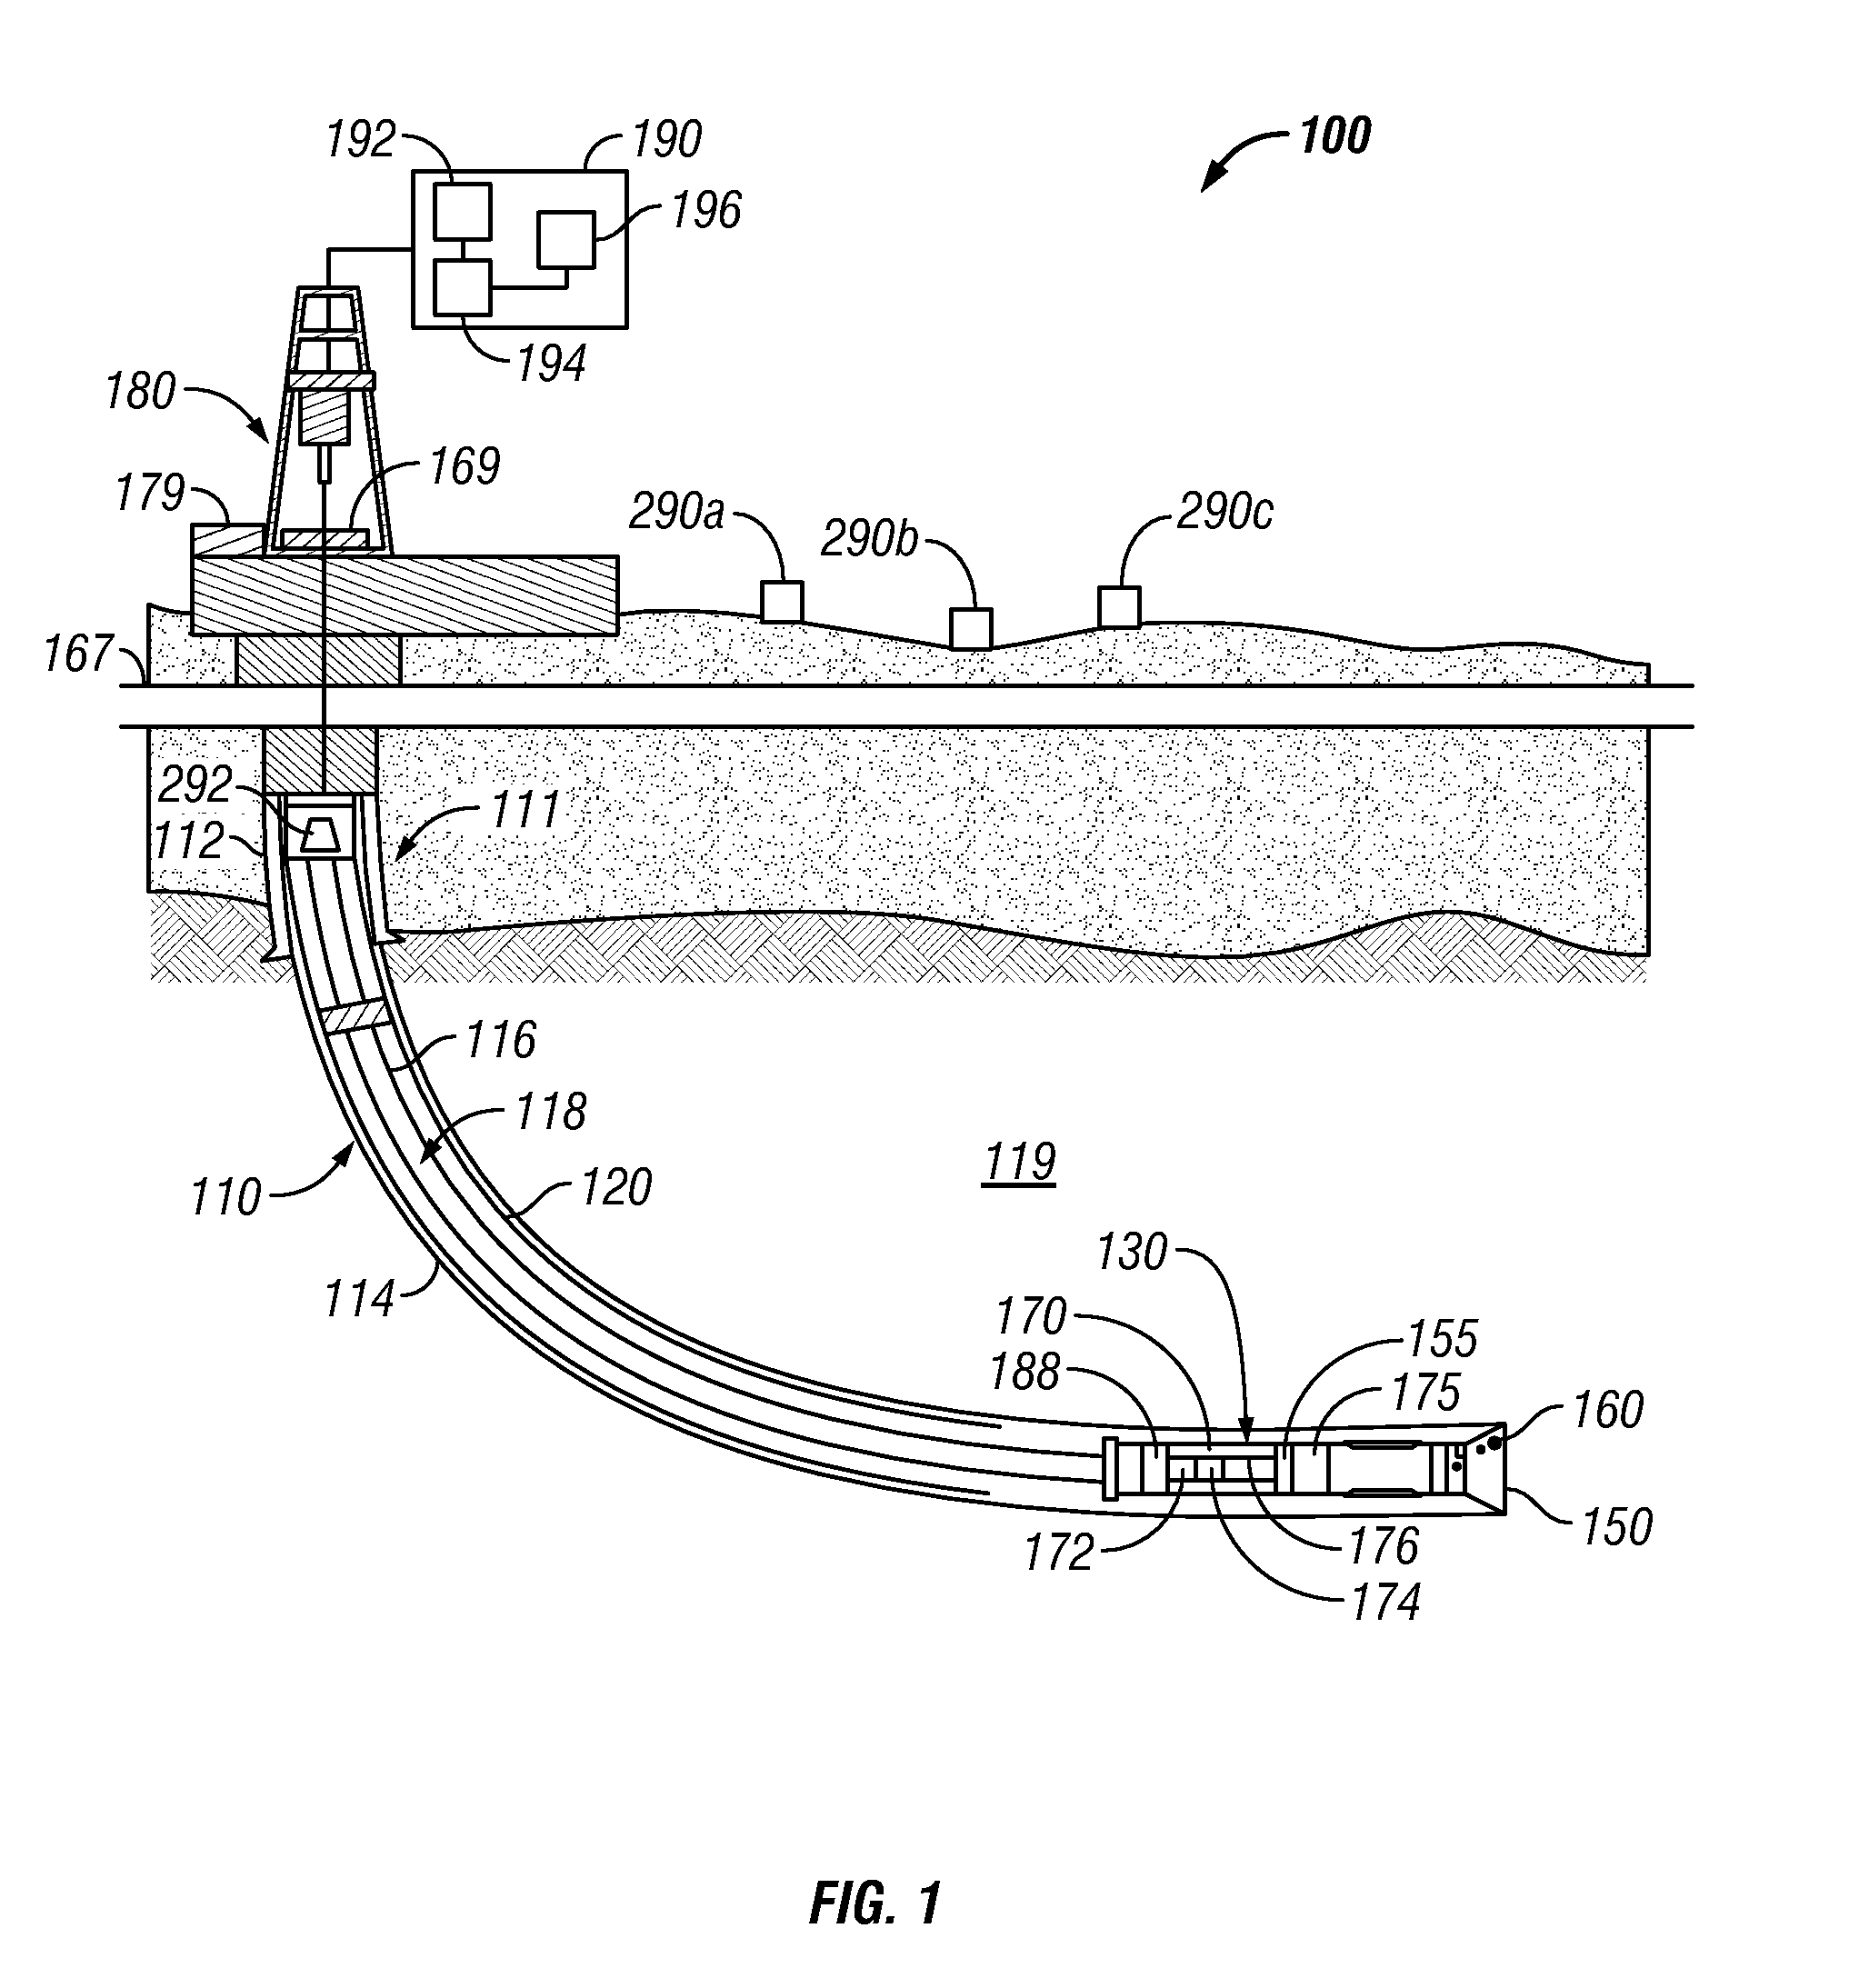 Bit Based Formation Evaluation and Drill Bit and Drill String Analysis Using an Acoustic Sensor